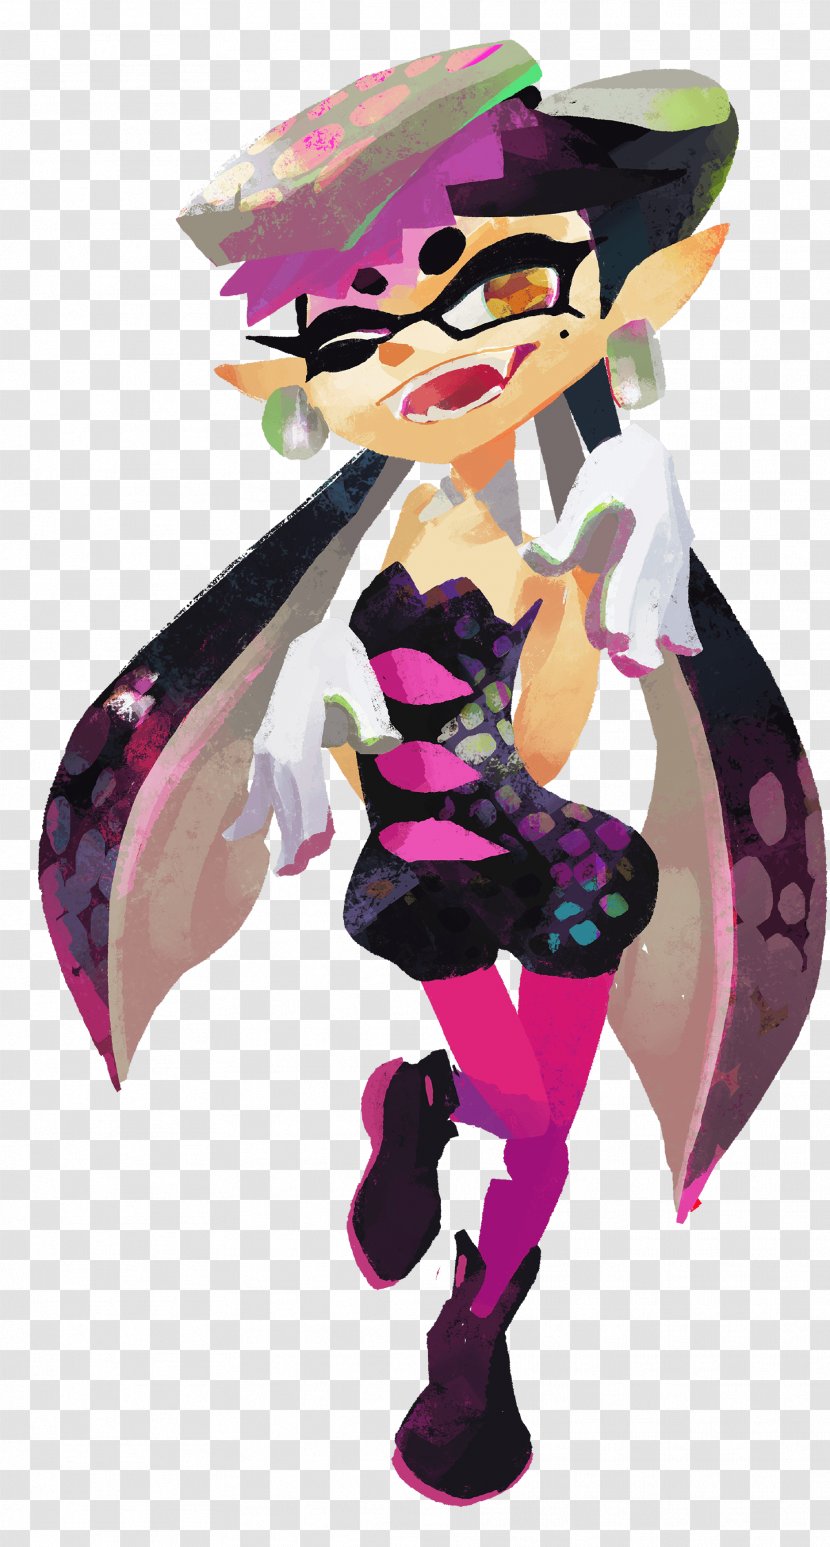 Splatoon 2 Video Game Callie Torres Character - Mythical Creature - Sister Transparent PNG